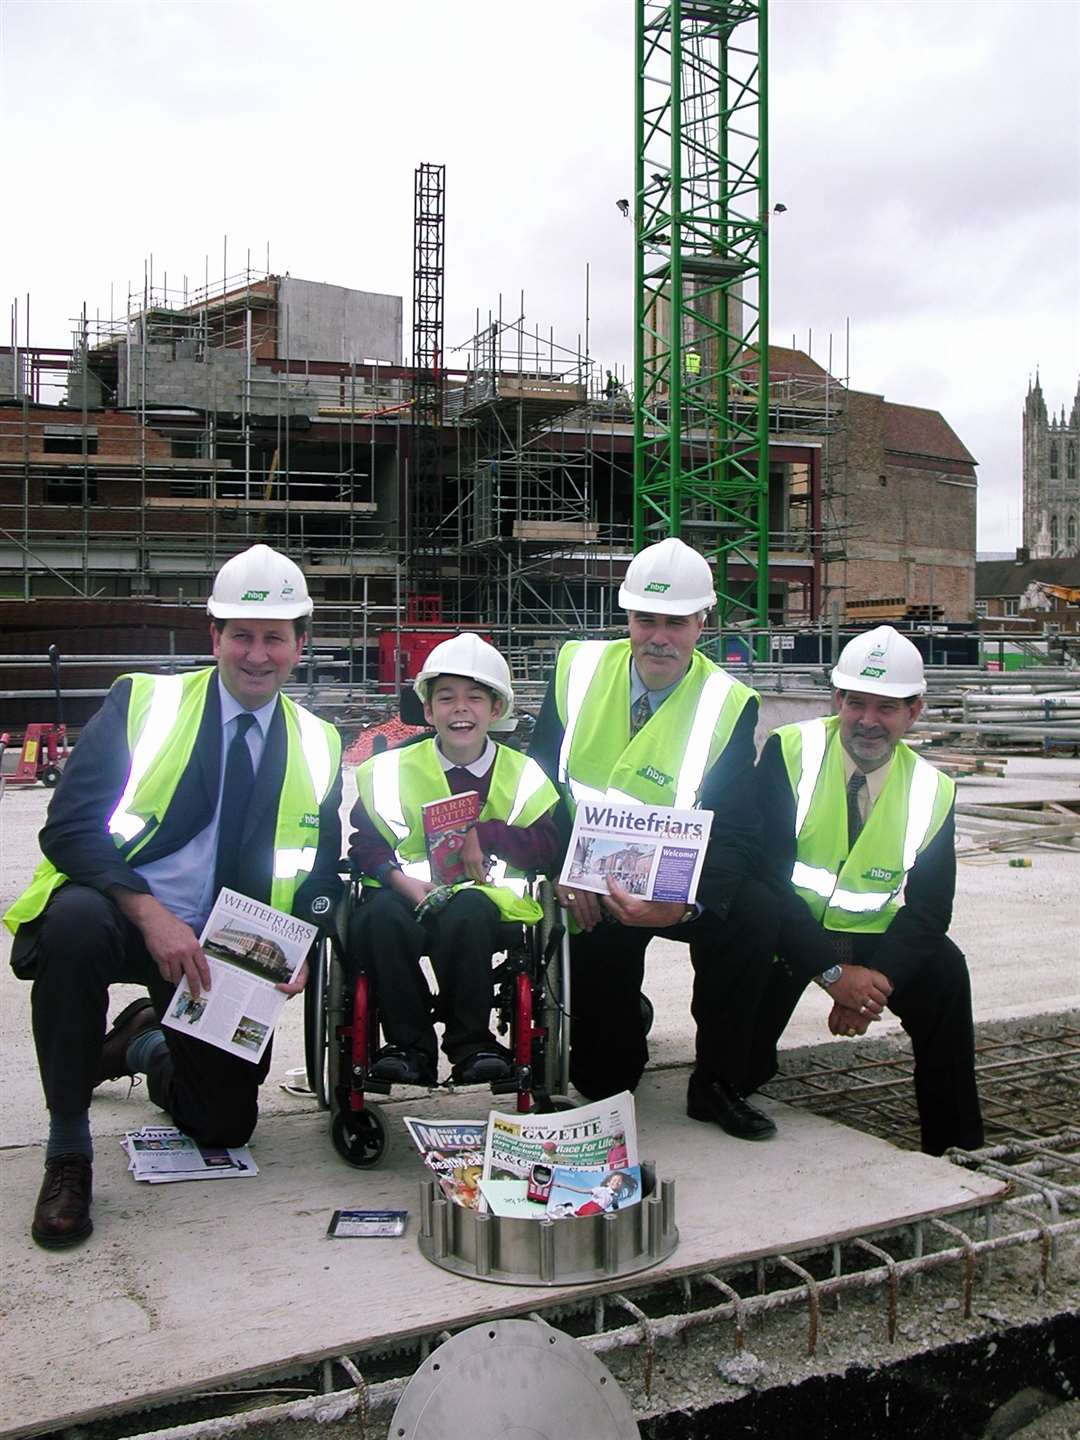 Peter Scutt, Matthew Dye, and Chris Edwards and Ted Hunt of HBG Construction at the Whitefriars site in 2003